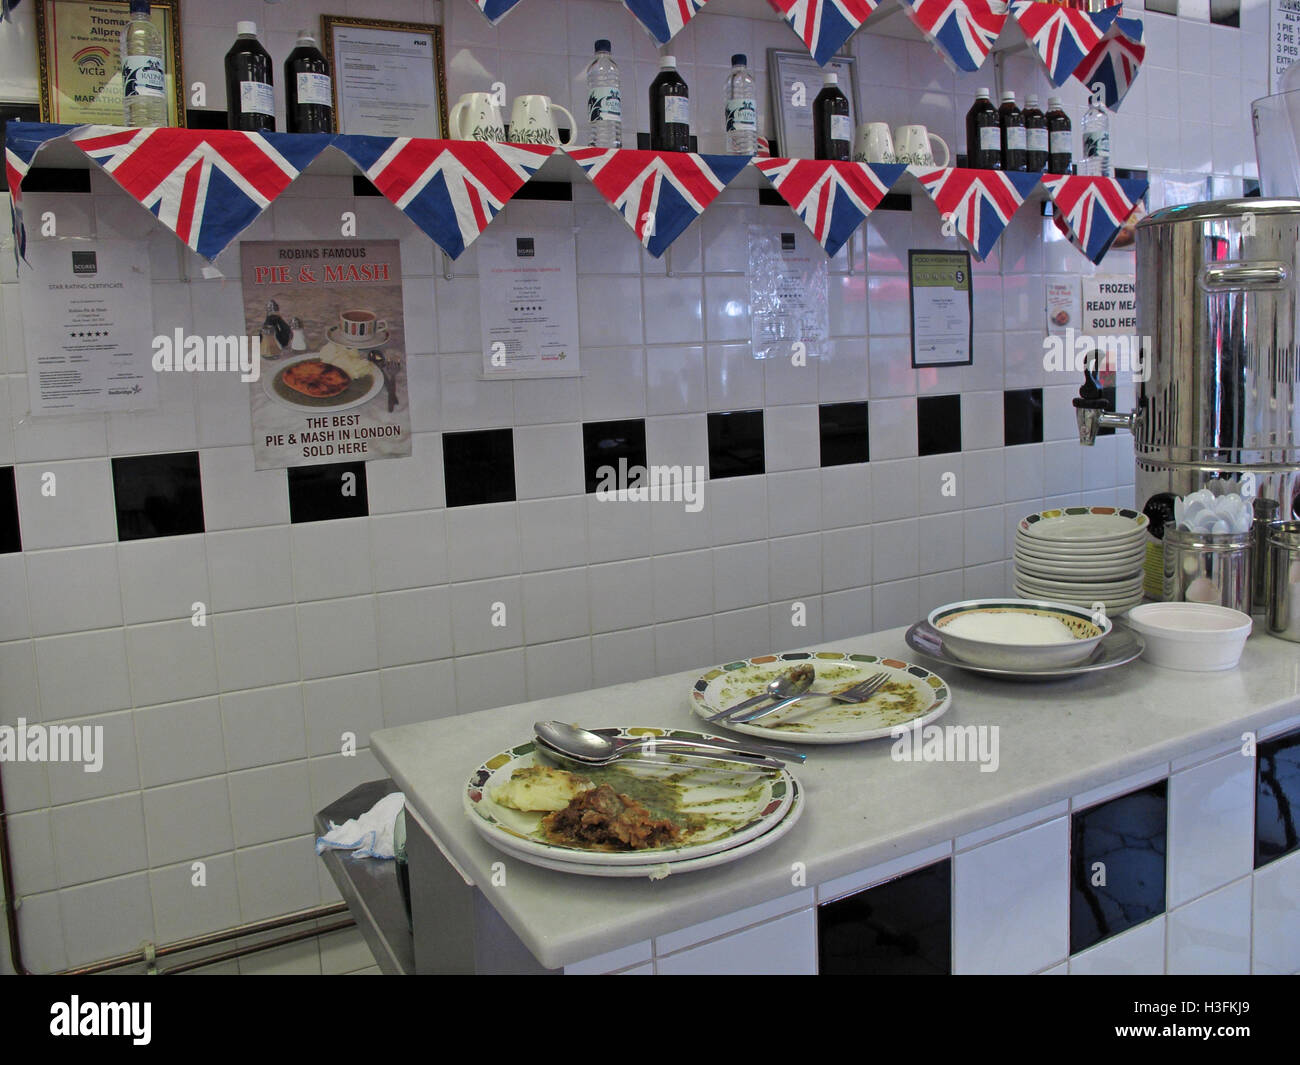 Inside Robins traditional Pie & Mash, Ilford Essex, Greater London, England, dirty plates Stock Photo